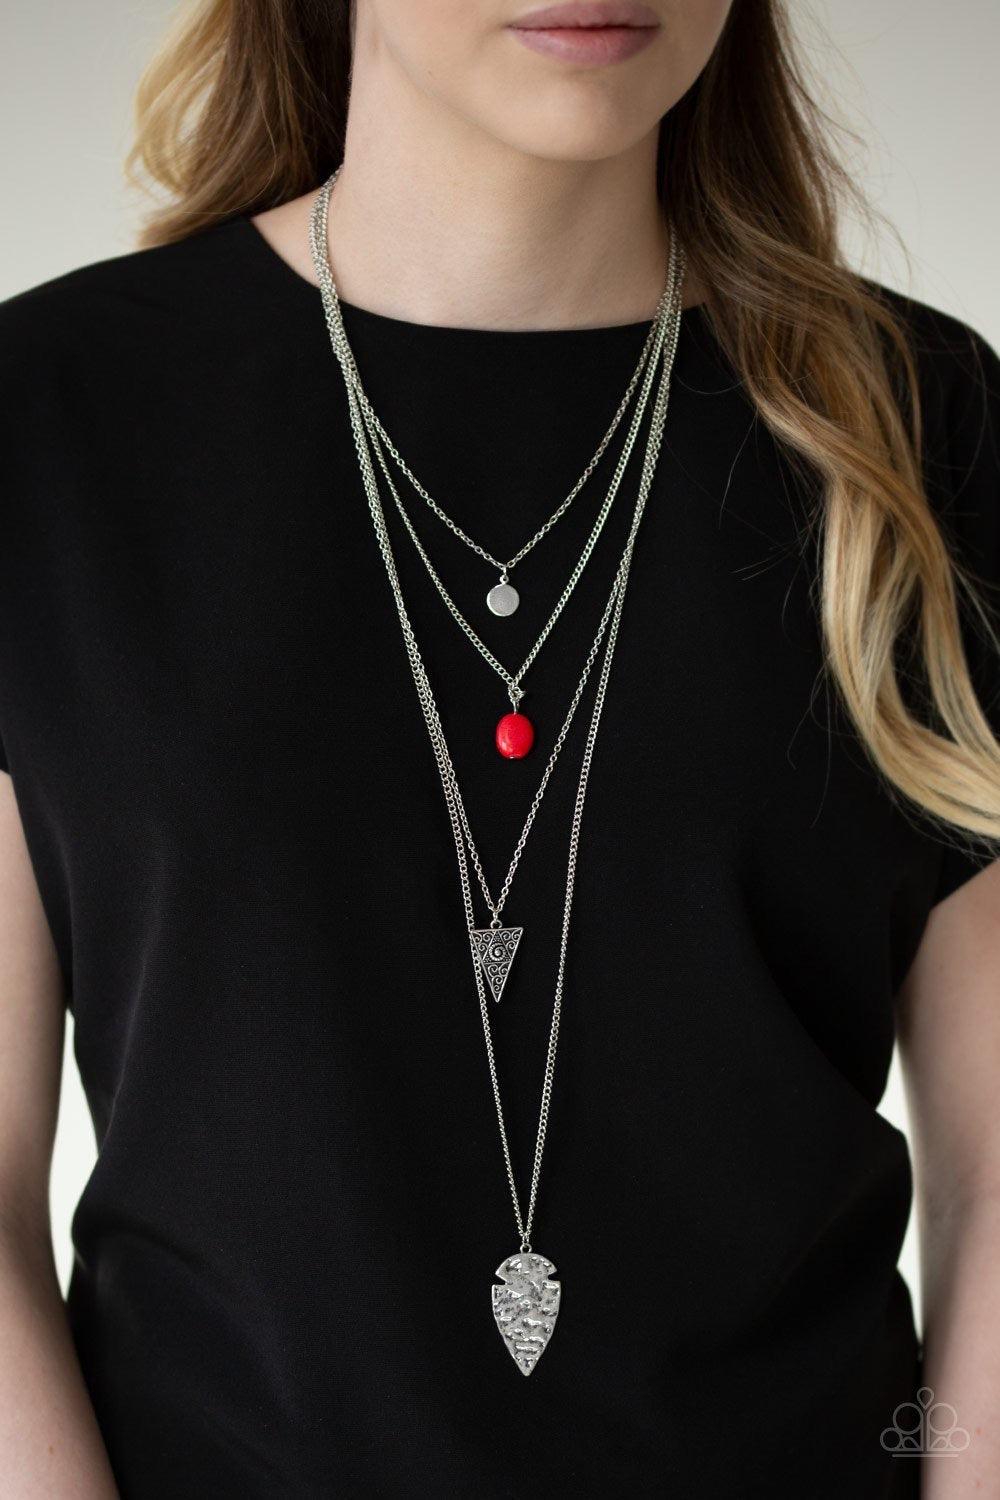 Paparazzi Accessories Grounded in ARTIFACT - Red Glistening silver chains drape across the chest, creating four shimmery layers. A dainty silver disc swings from the uppermost layer above a fiery red stone, ornate triangular frame, and hammered silver arr